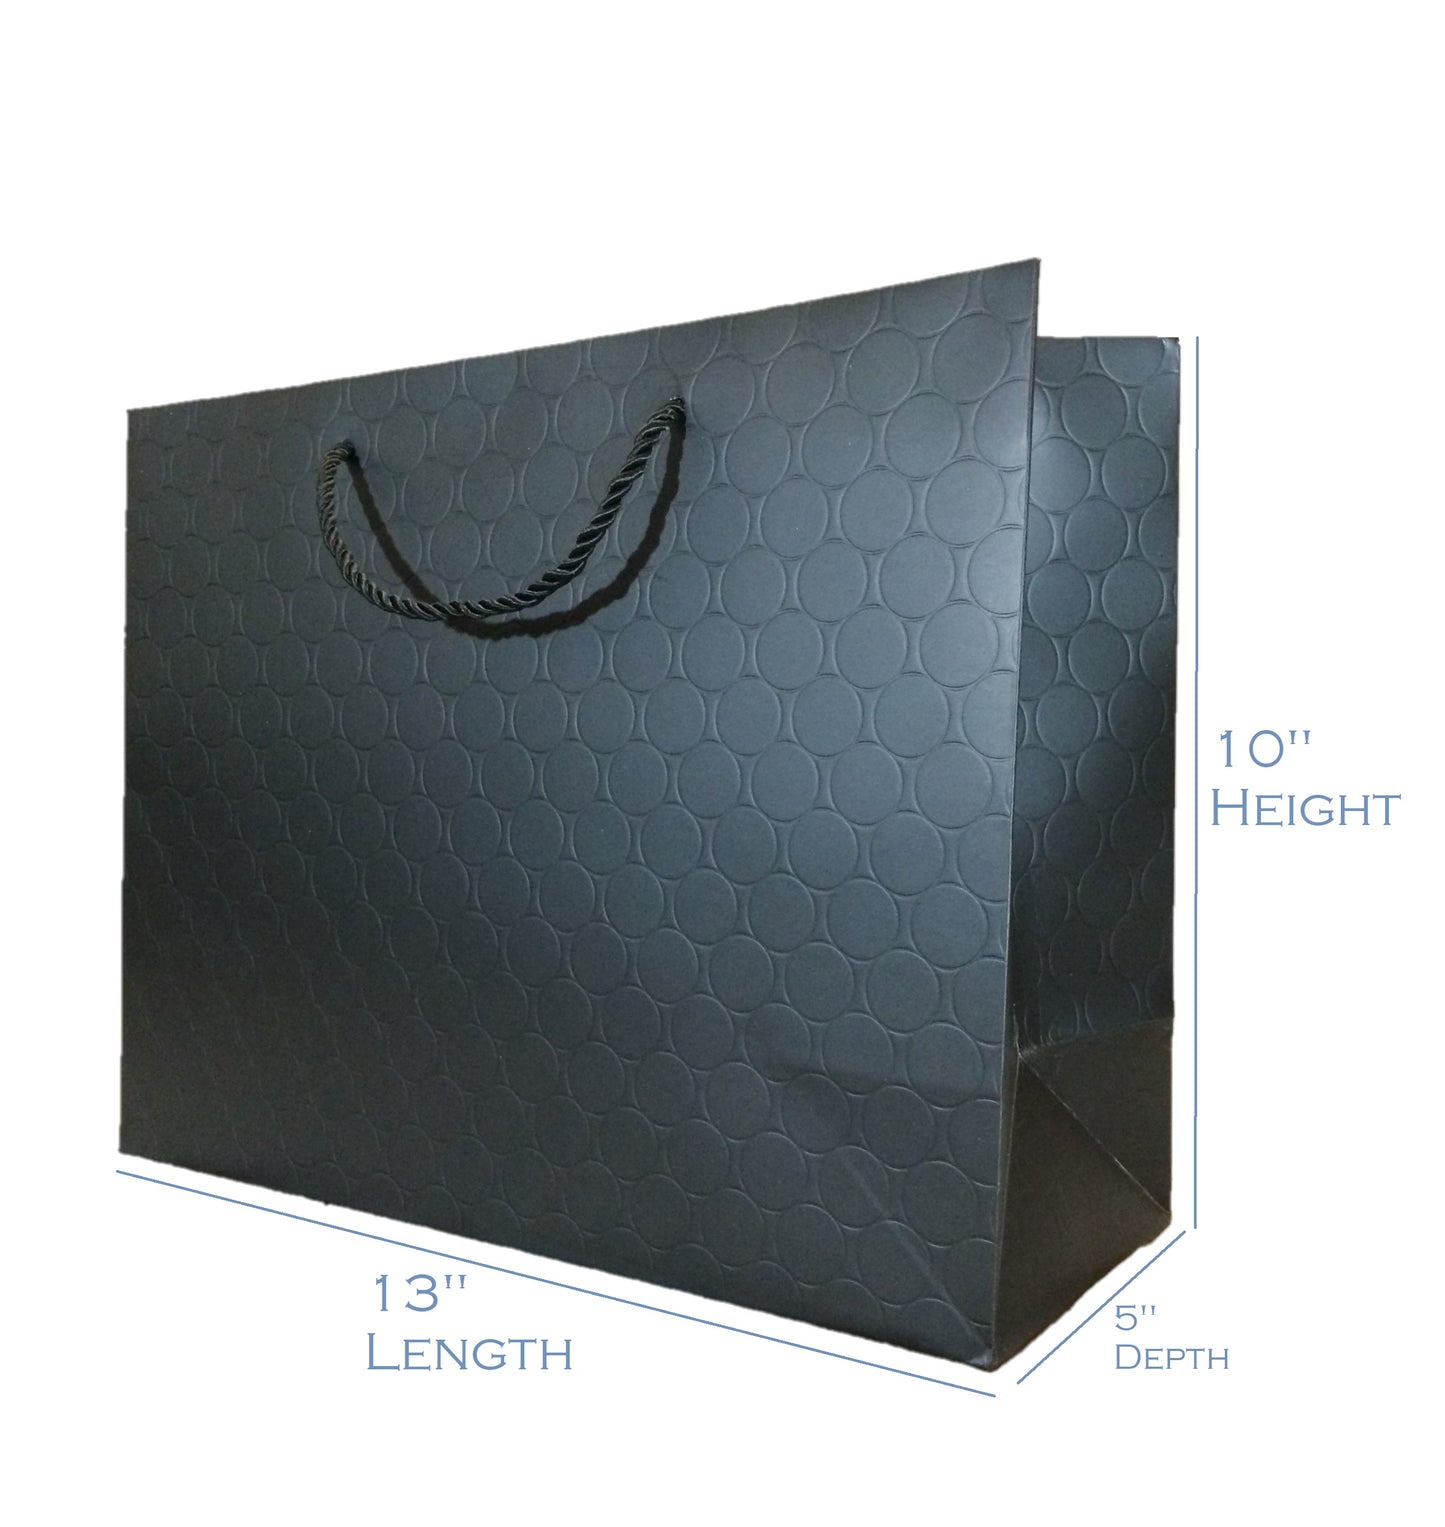 12 Large Black Gift Bags with Handles 13x10 Luxury Heavy Duty Paper Shopping Bag 13x5x10 Premium Elegant Matte Modern Embossed for Retail Merchandise Clothing Boutique Wedding Bridal Baby Shower